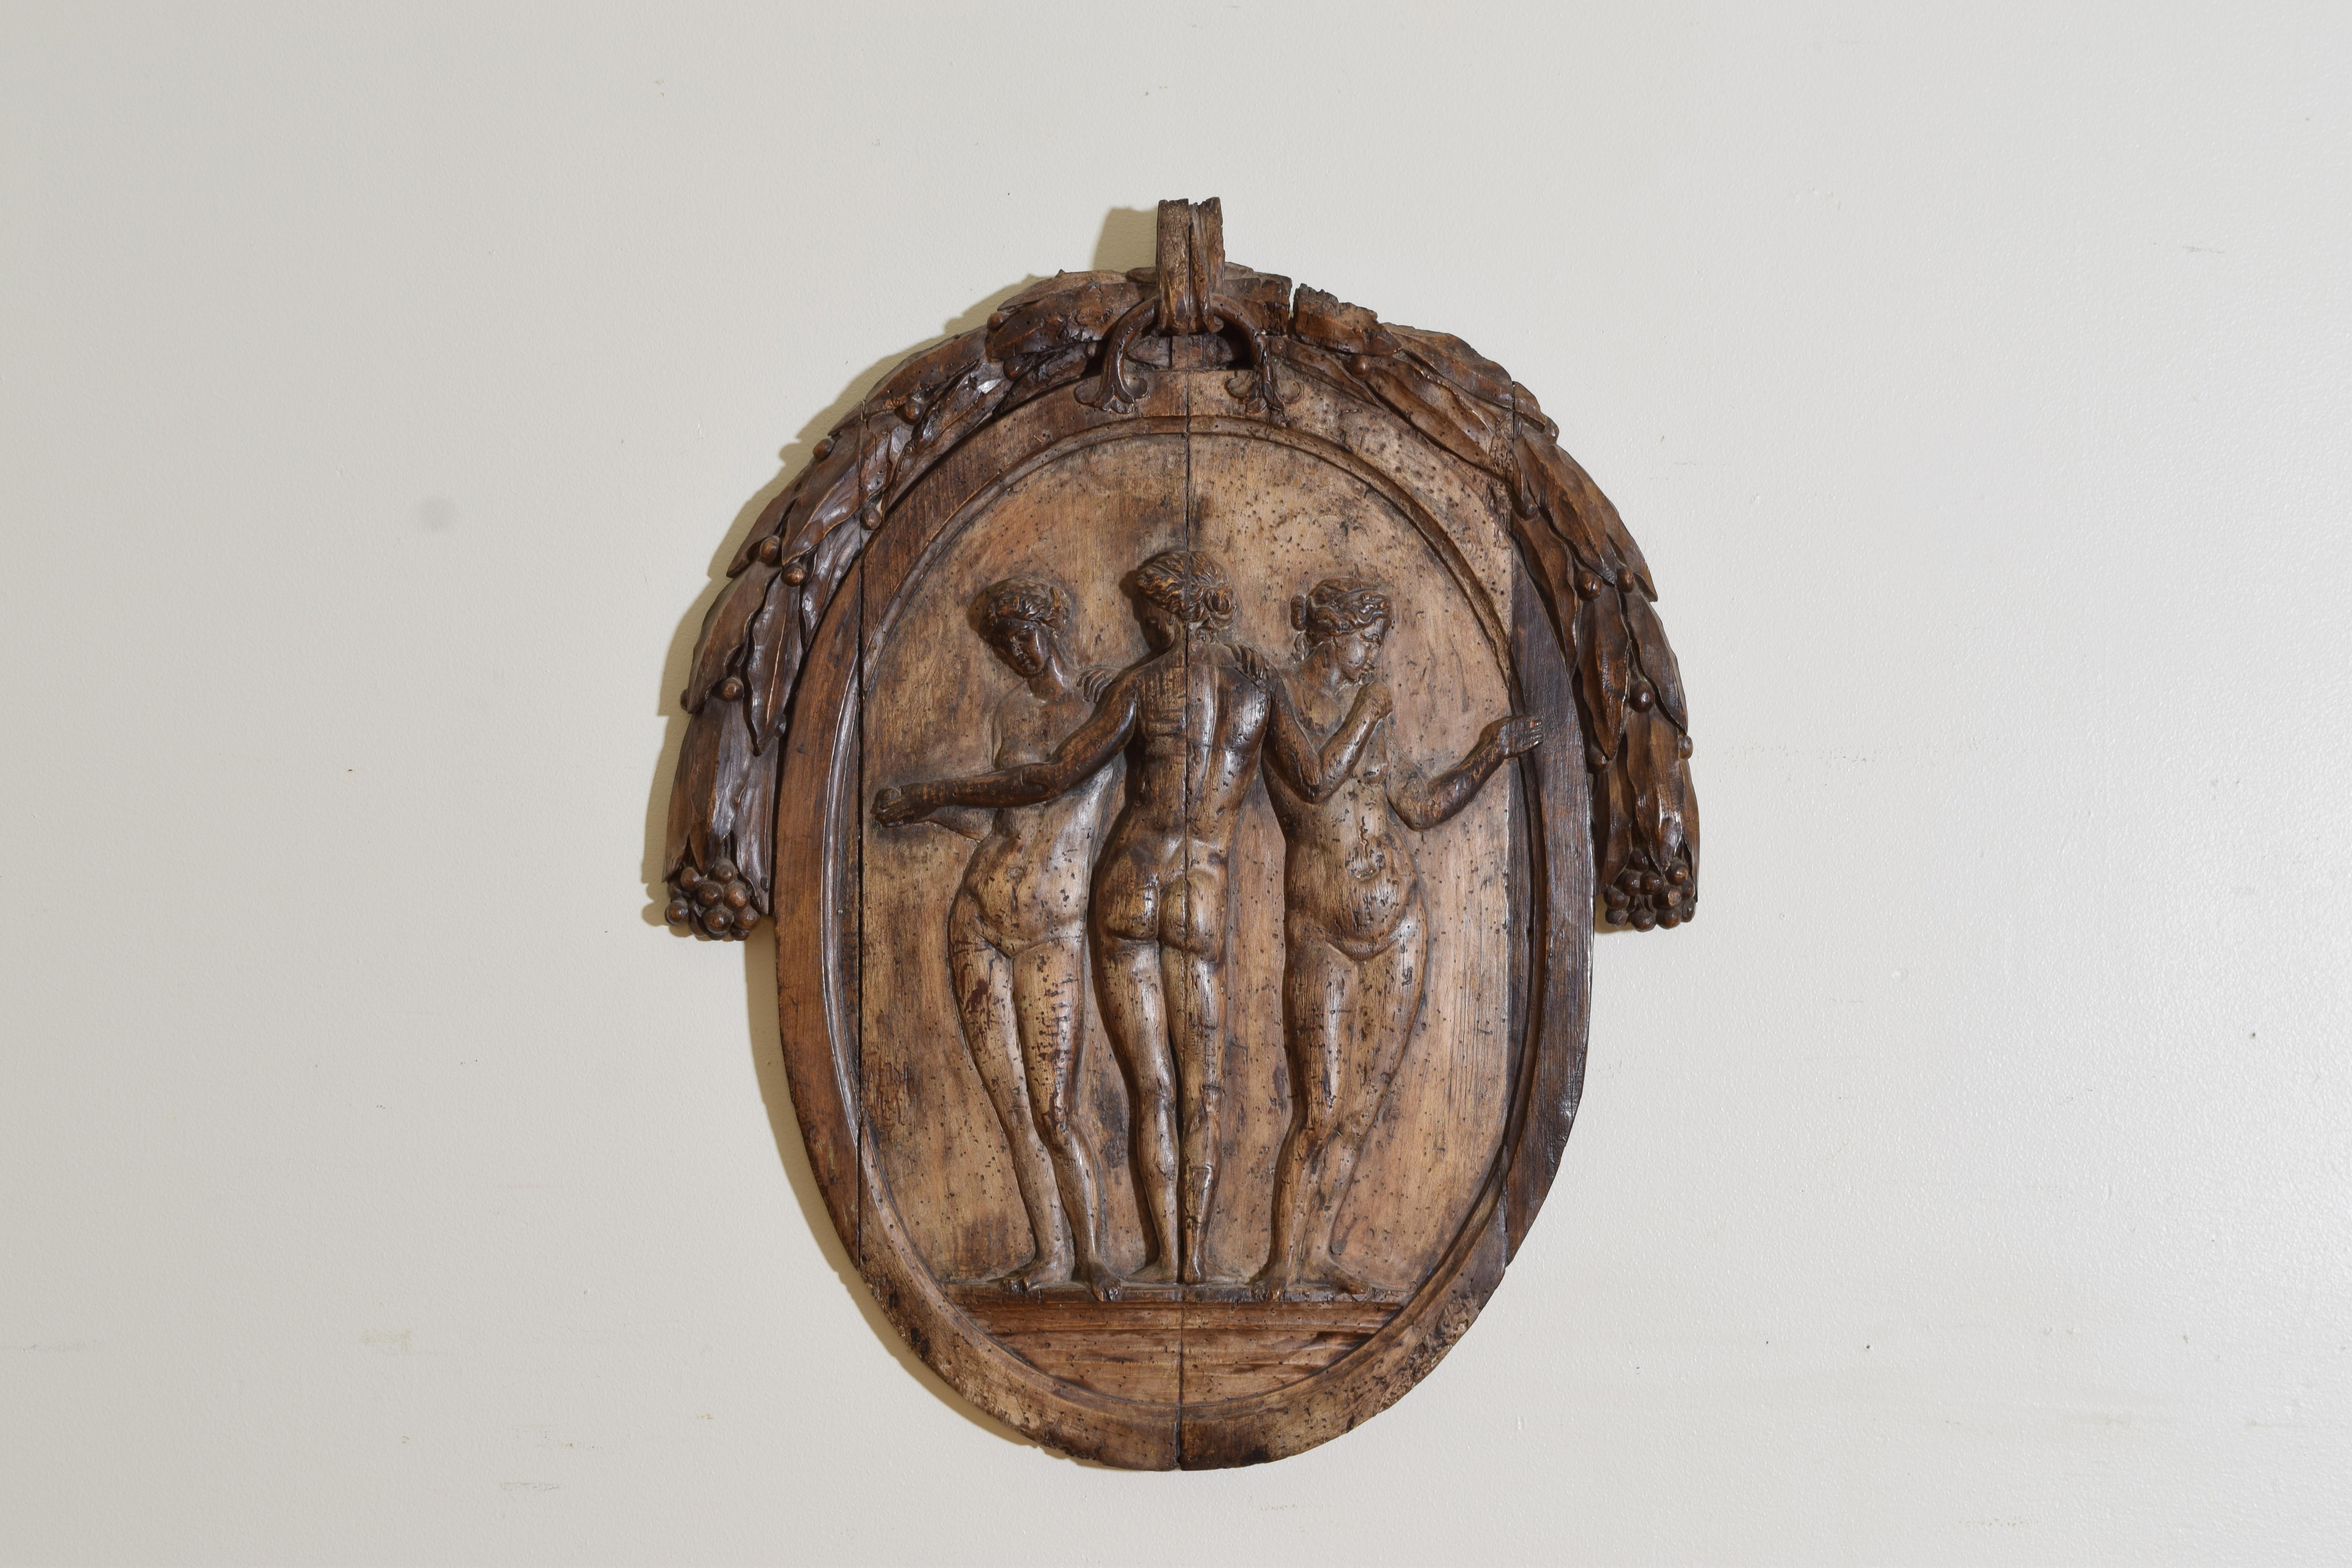 Relief carving of pinewood depicting The Three Graces, one of the most classical subjects of Greek and Roman antiquity.  Carving tools are used to create the image until it becomes three dimensional and protrudes from the background.  Wheat is